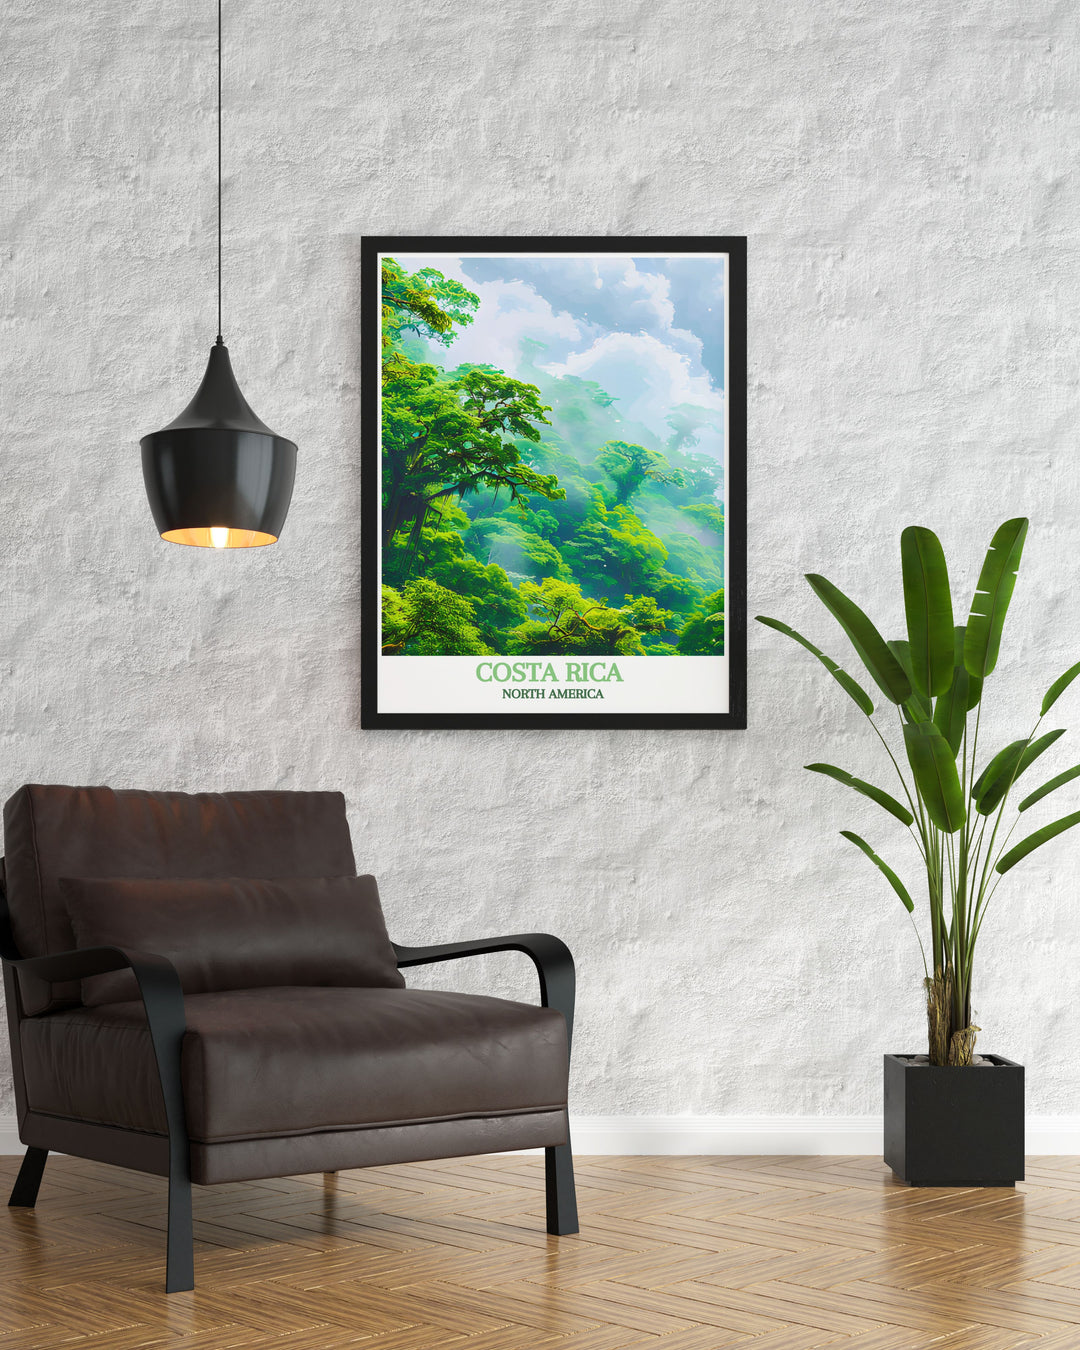 High quality print of Monteverde Cloud Forest Reserve and Saint Teresa in Costa Rica, capturing the stunning landscapes and tranquil atmosphere of these unique locations. Ideal for art lovers who appreciate both nature and tropical escapes.